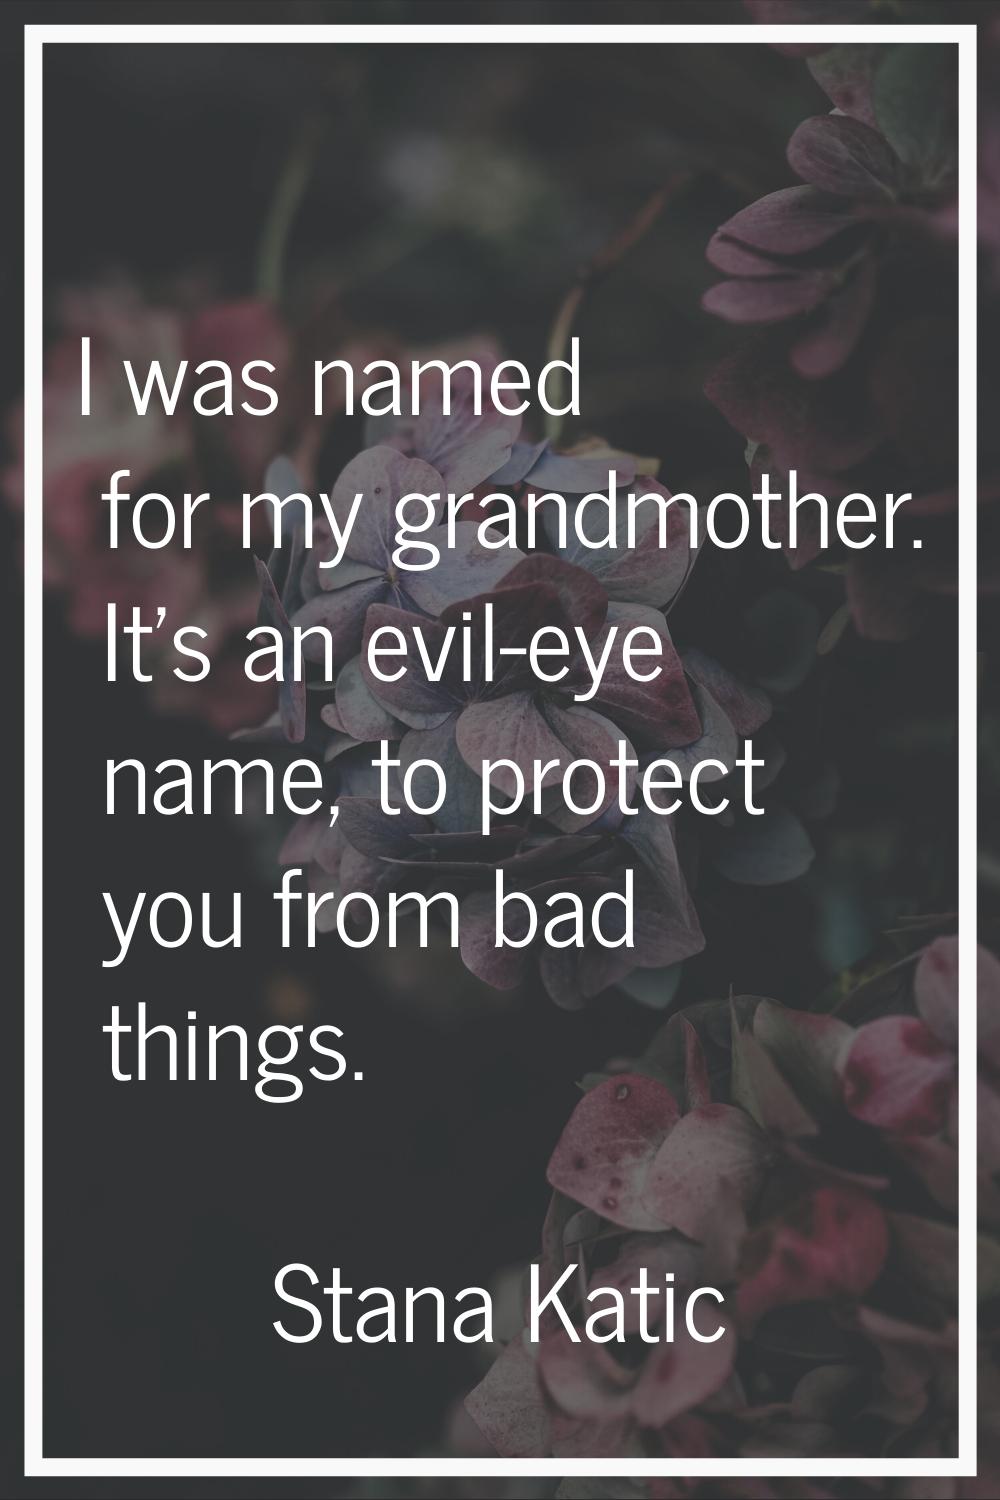 I was named for my grandmother. It's an evil-eye name, to protect you from bad things.